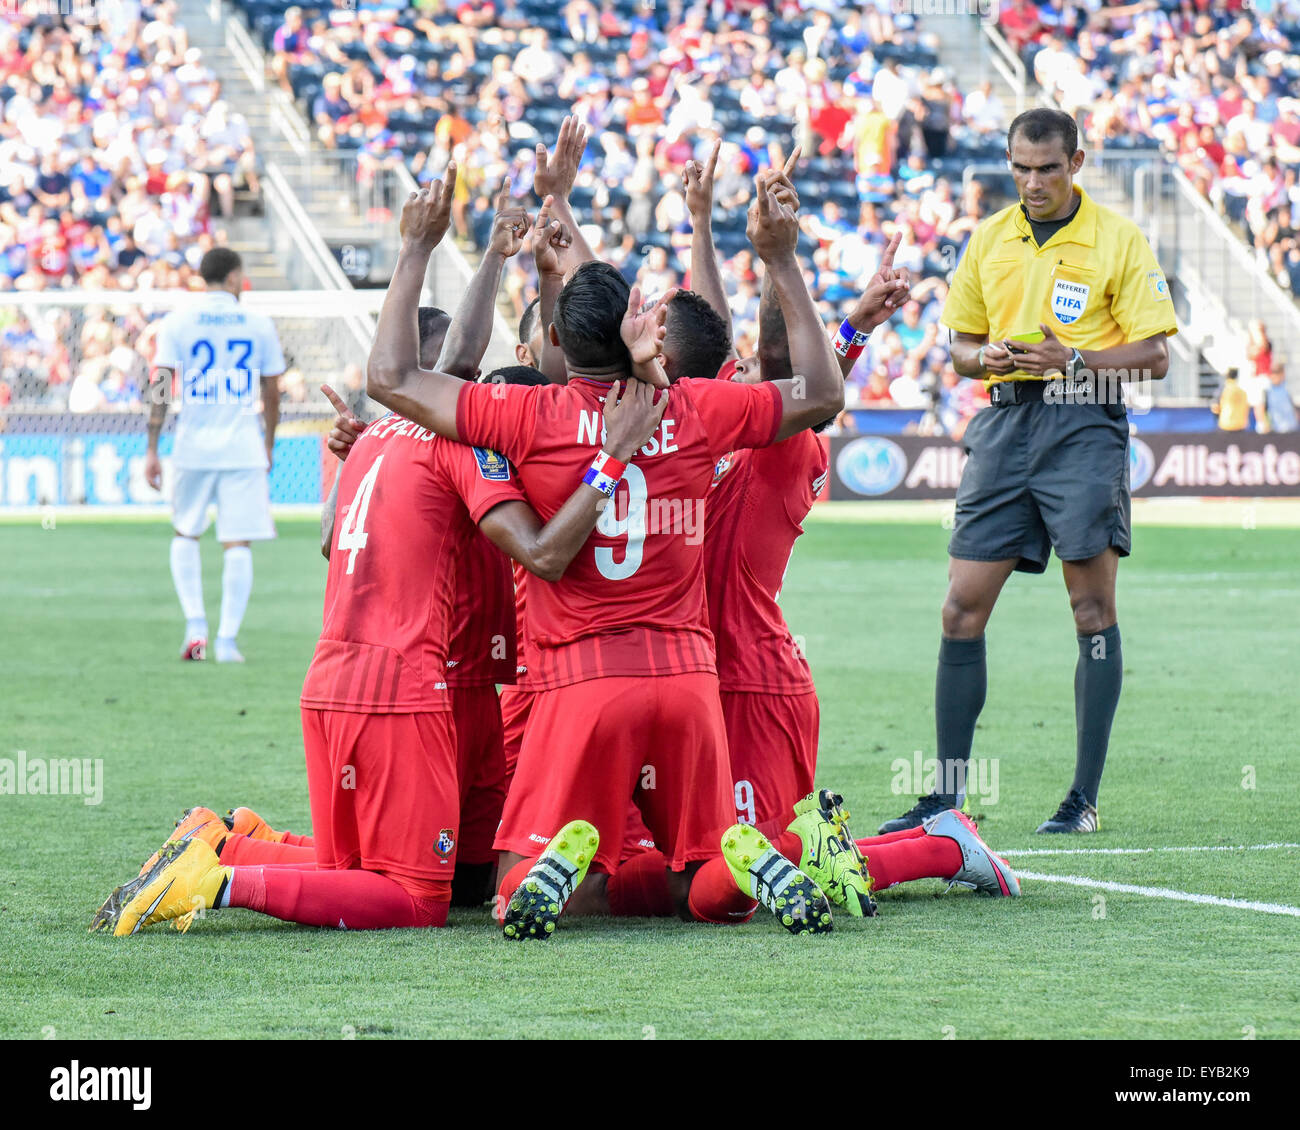 Panamanian football team defeats the United States Mens National Soccer Team on penalty kicks in the third place game of the CONCACAF Gold Cup | Professional soccer / football players showcase athleticism and competitive drive on the pitch in Chester Pennsylvania | American athletes / USMNT compete and lose in World Cup tune-up | Stock Photo